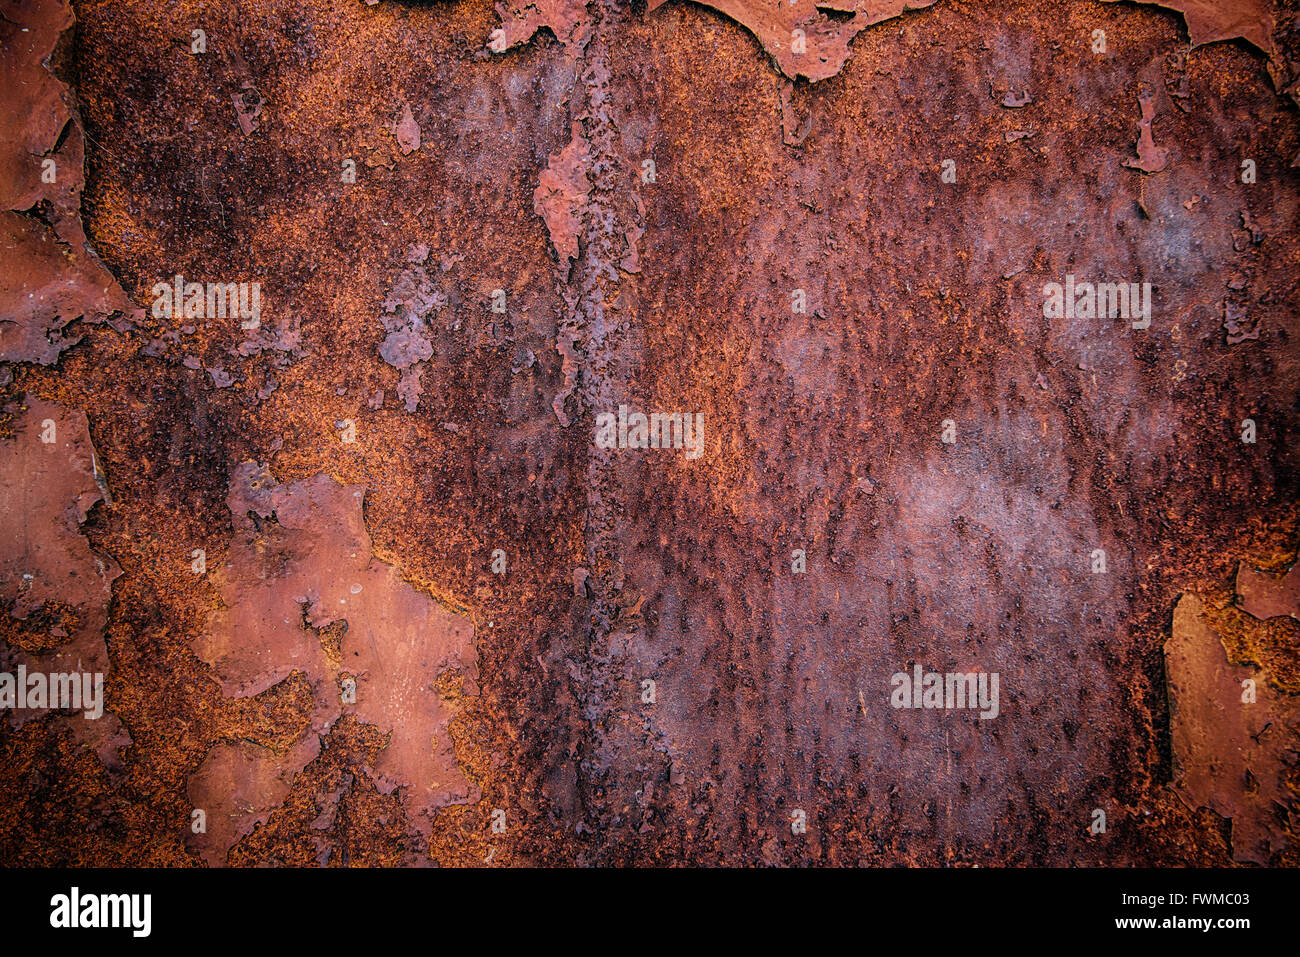 Rusty metal plate texture as background, hdr image Stock Photo